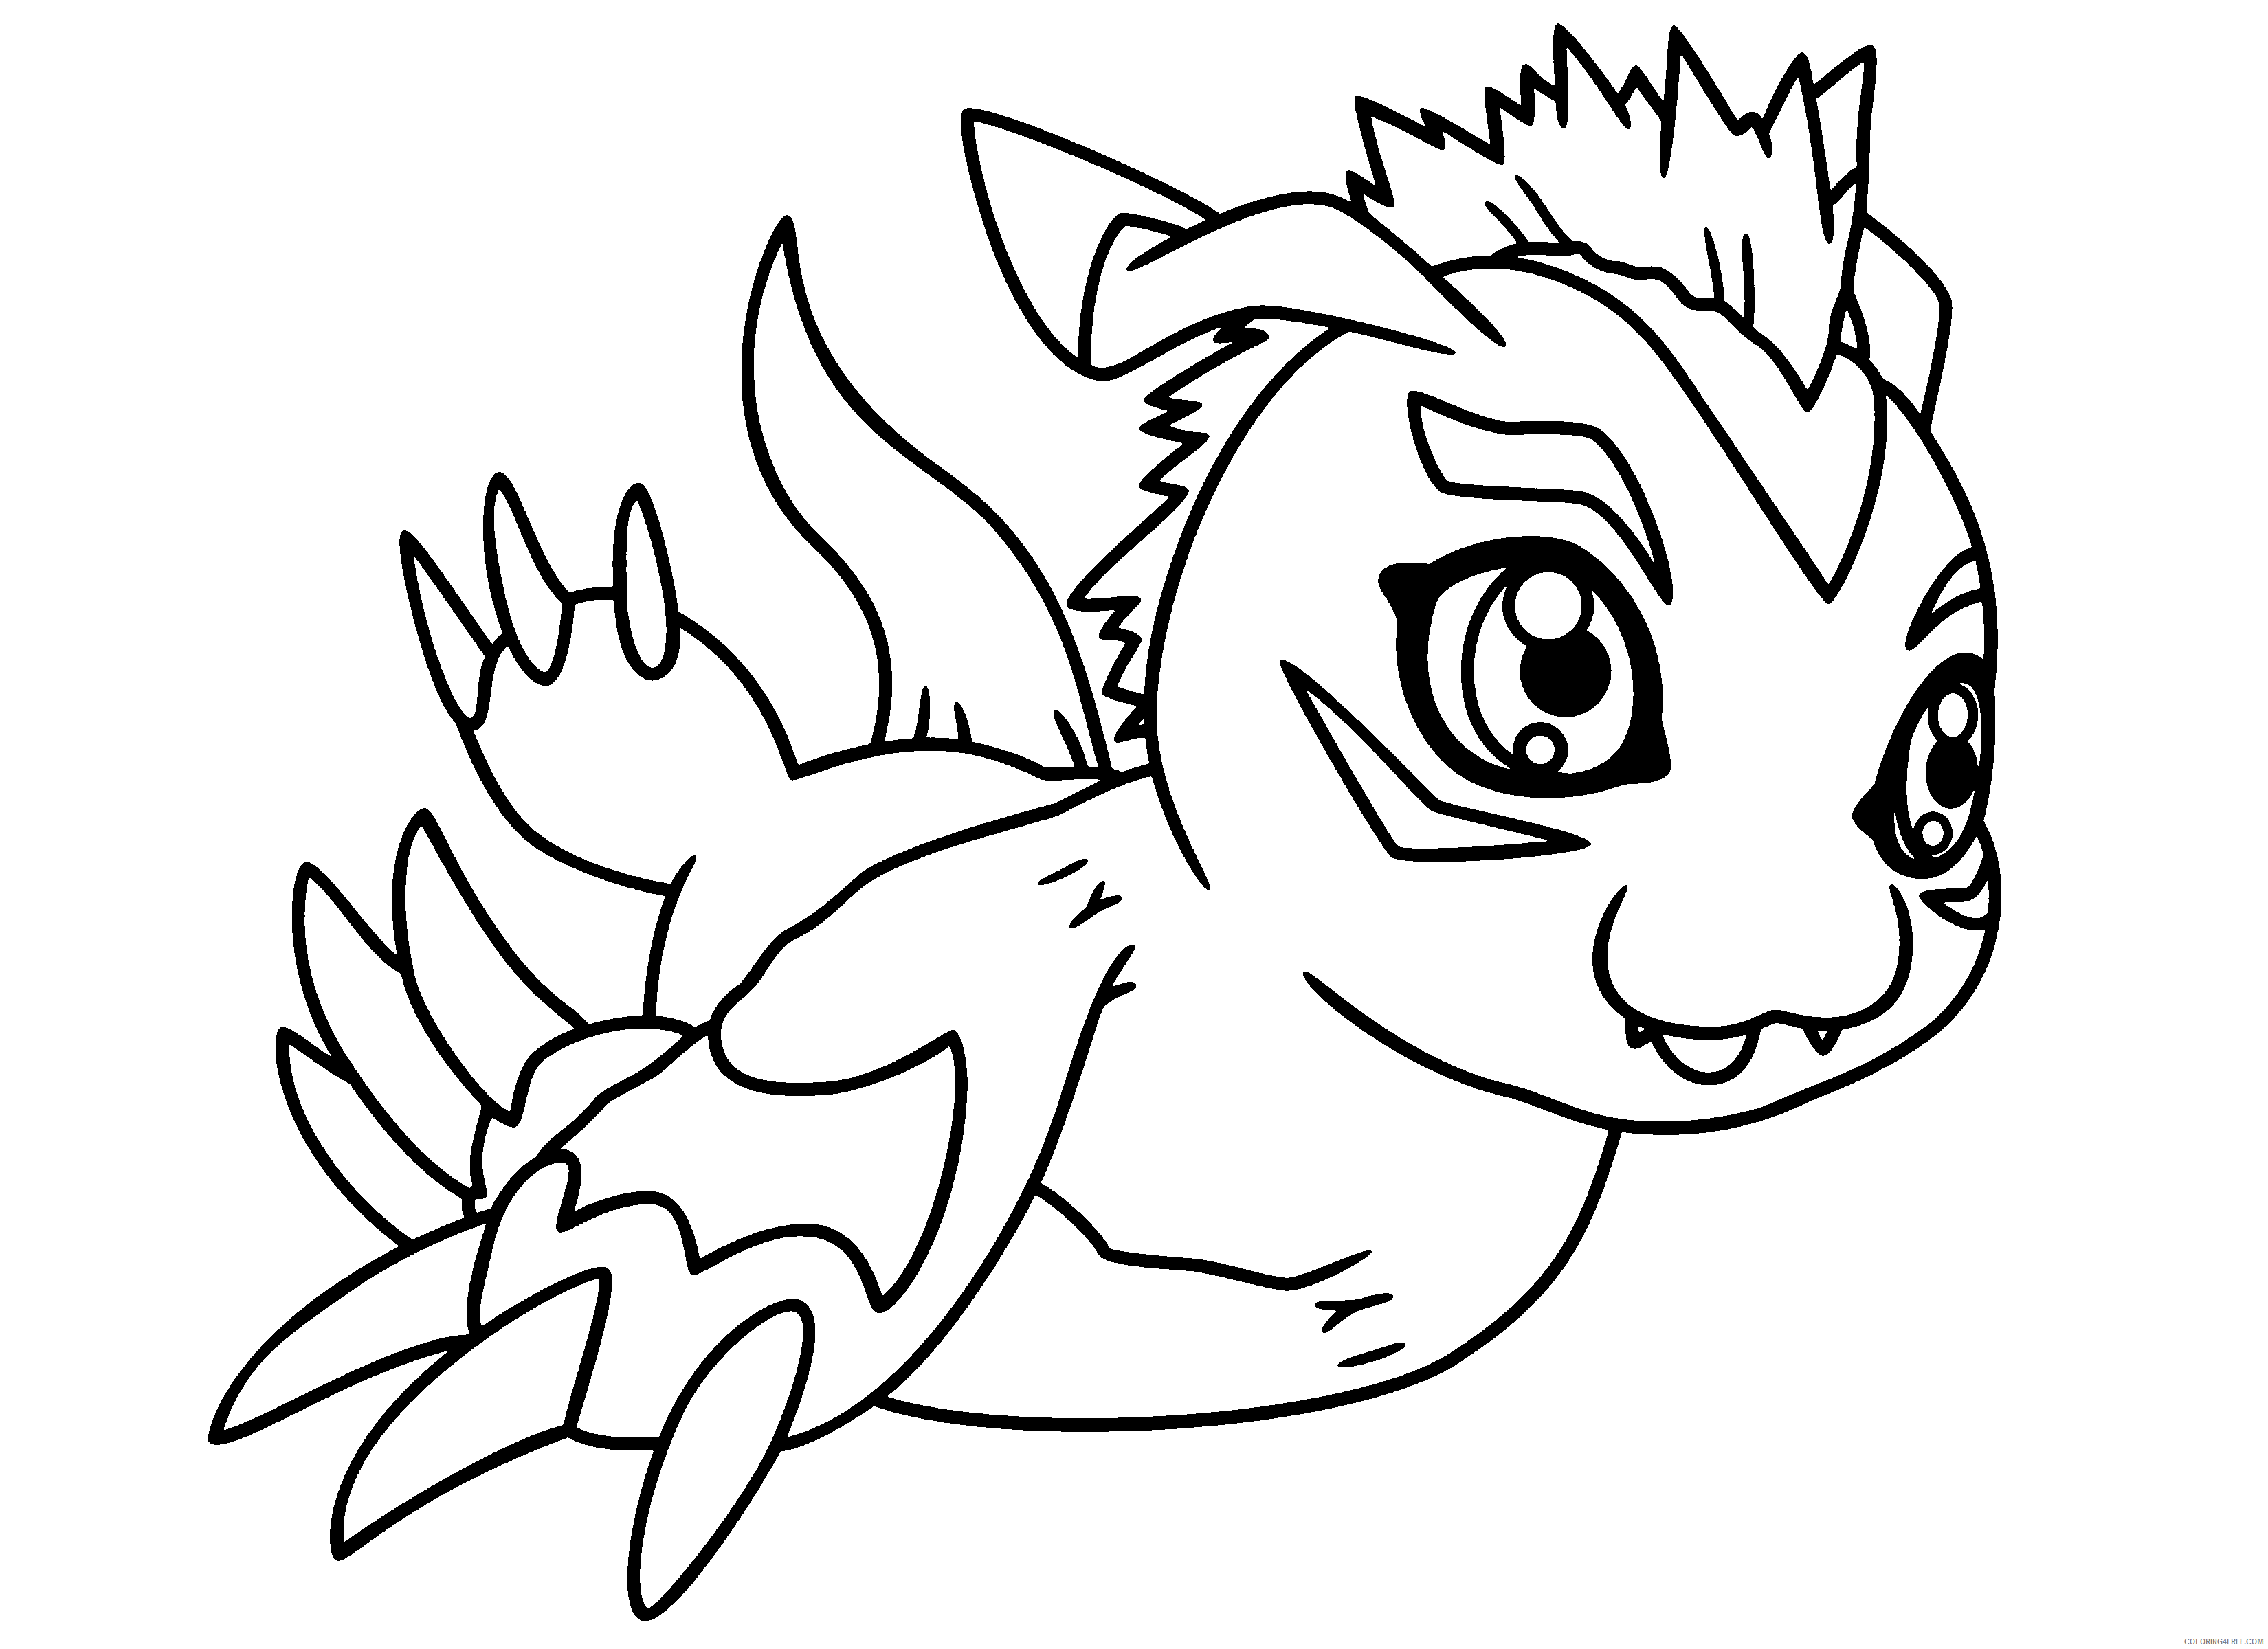 Digimon Printable Coloring Pages Anime digimon 194 2021 0282 Coloring4free